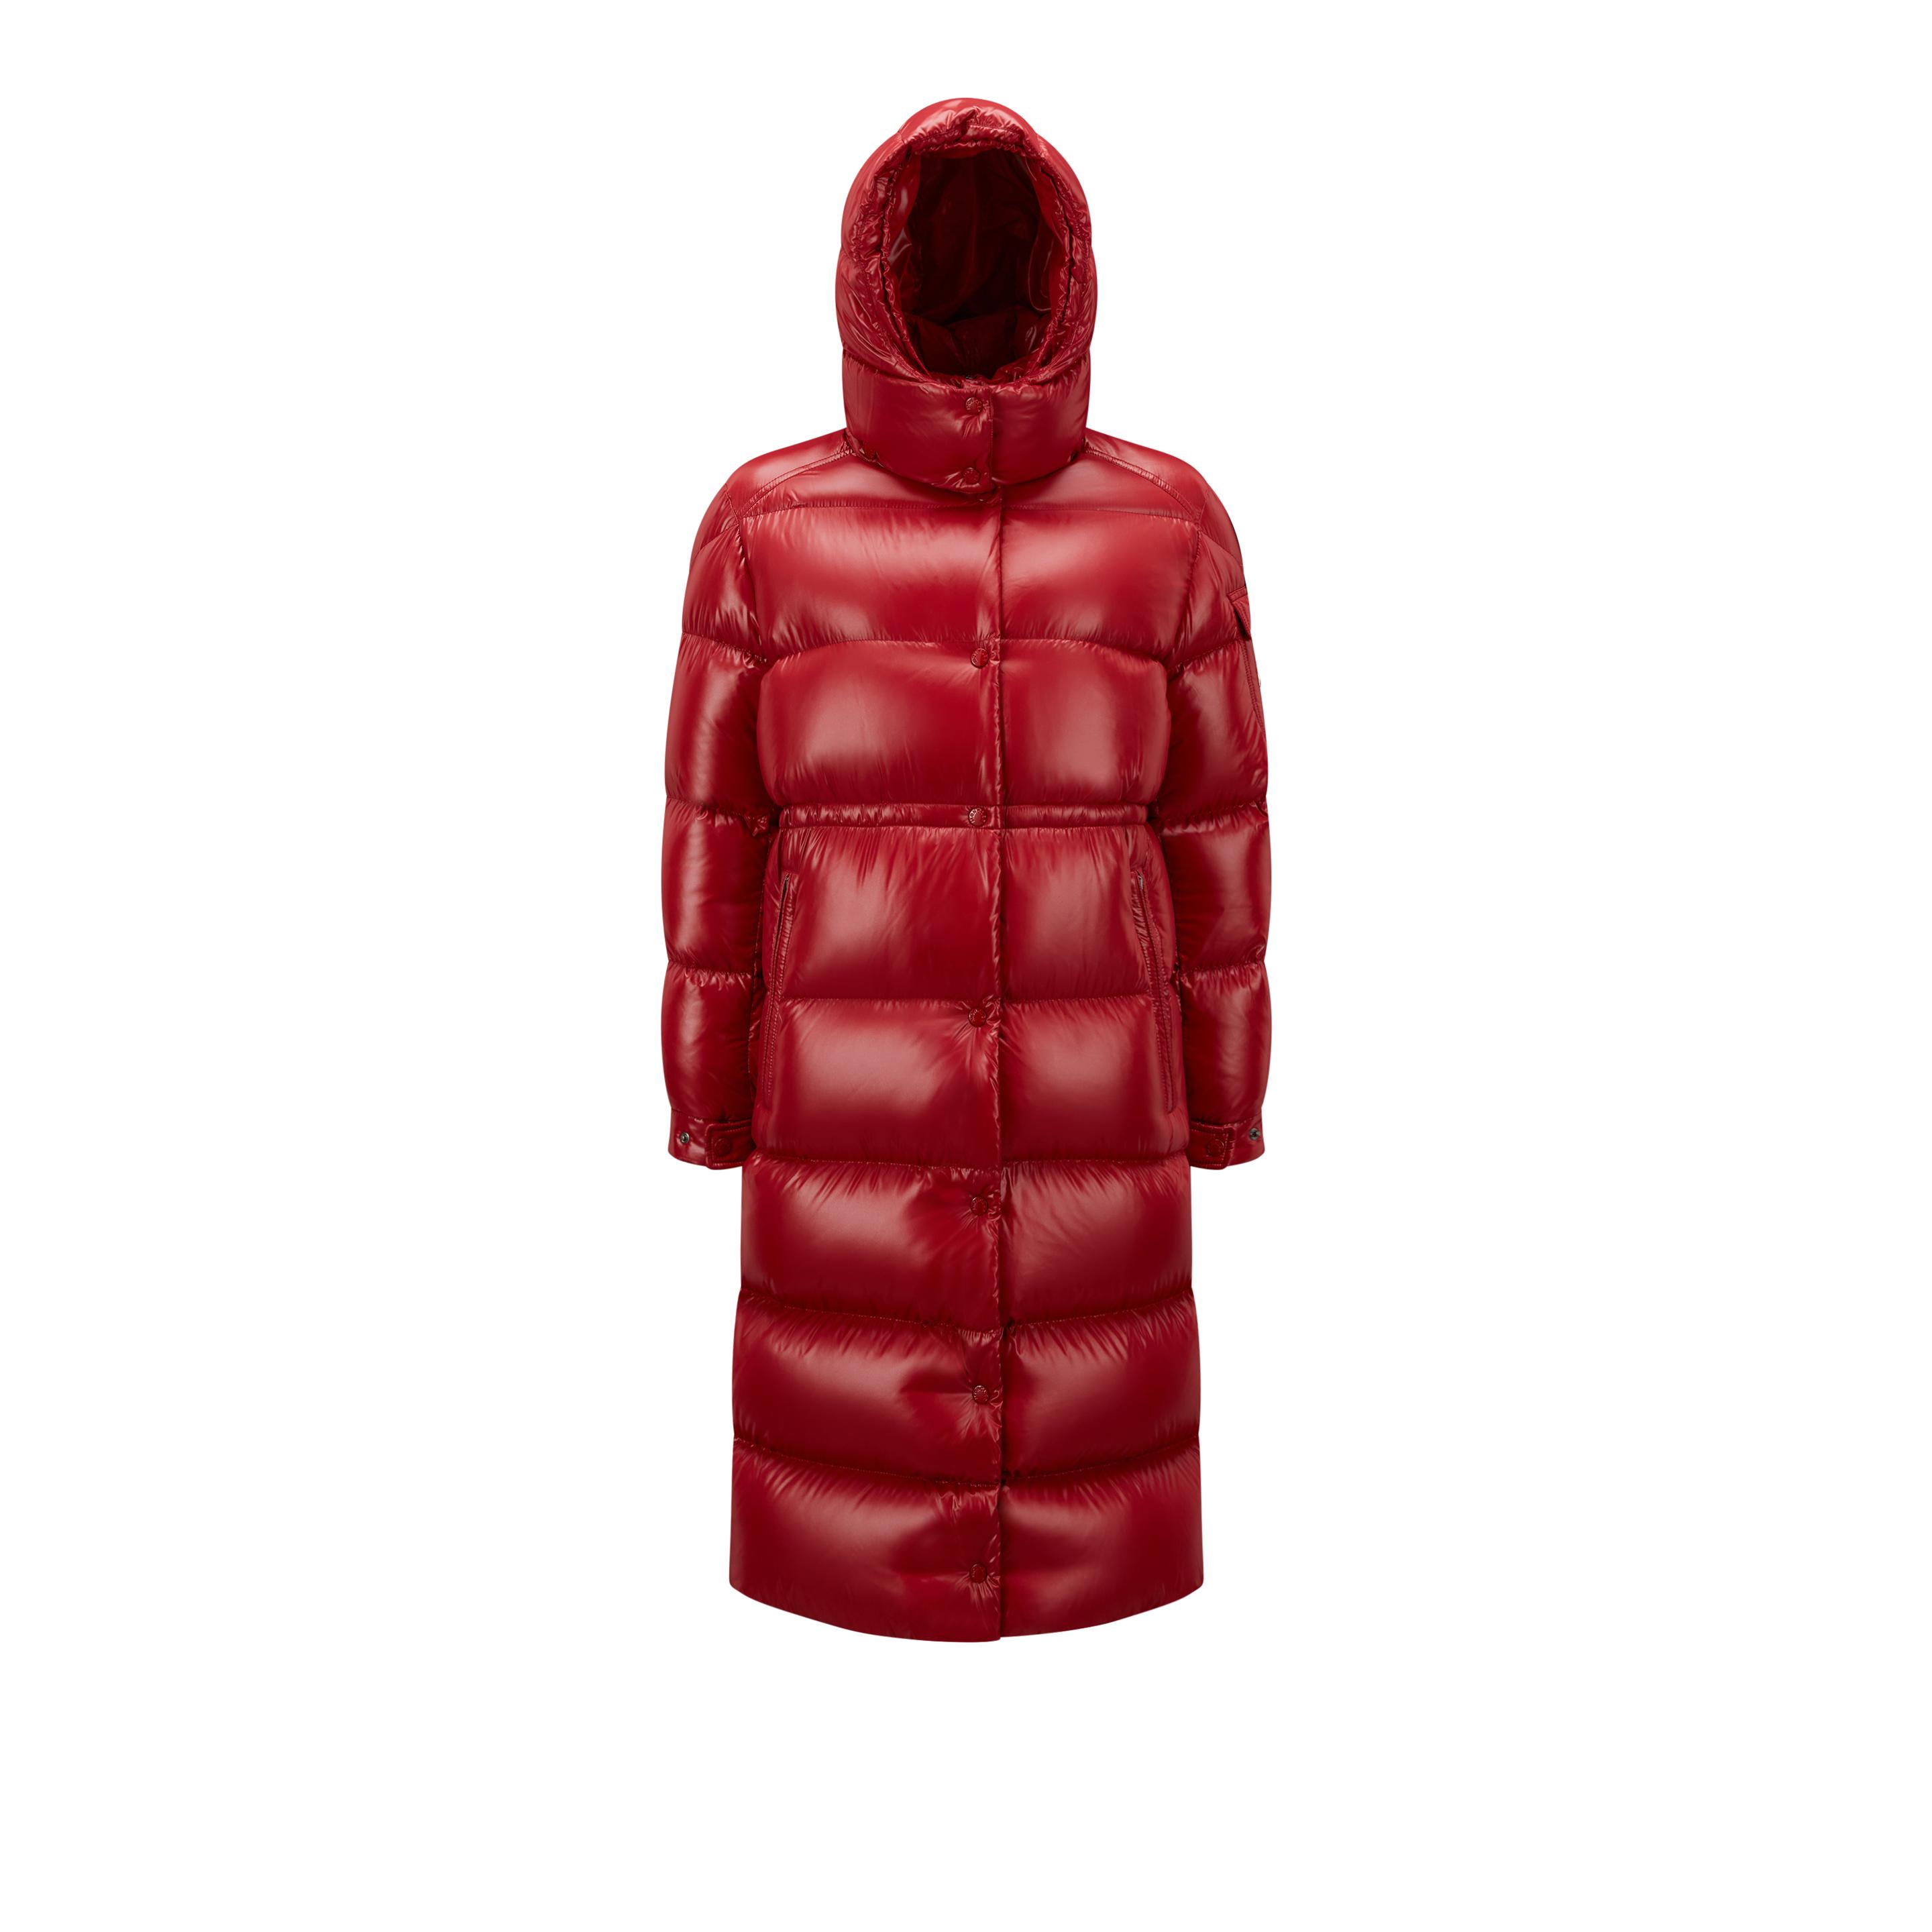 Moncler Cavettaz Long Down Jacket in Red | Lyst Canada